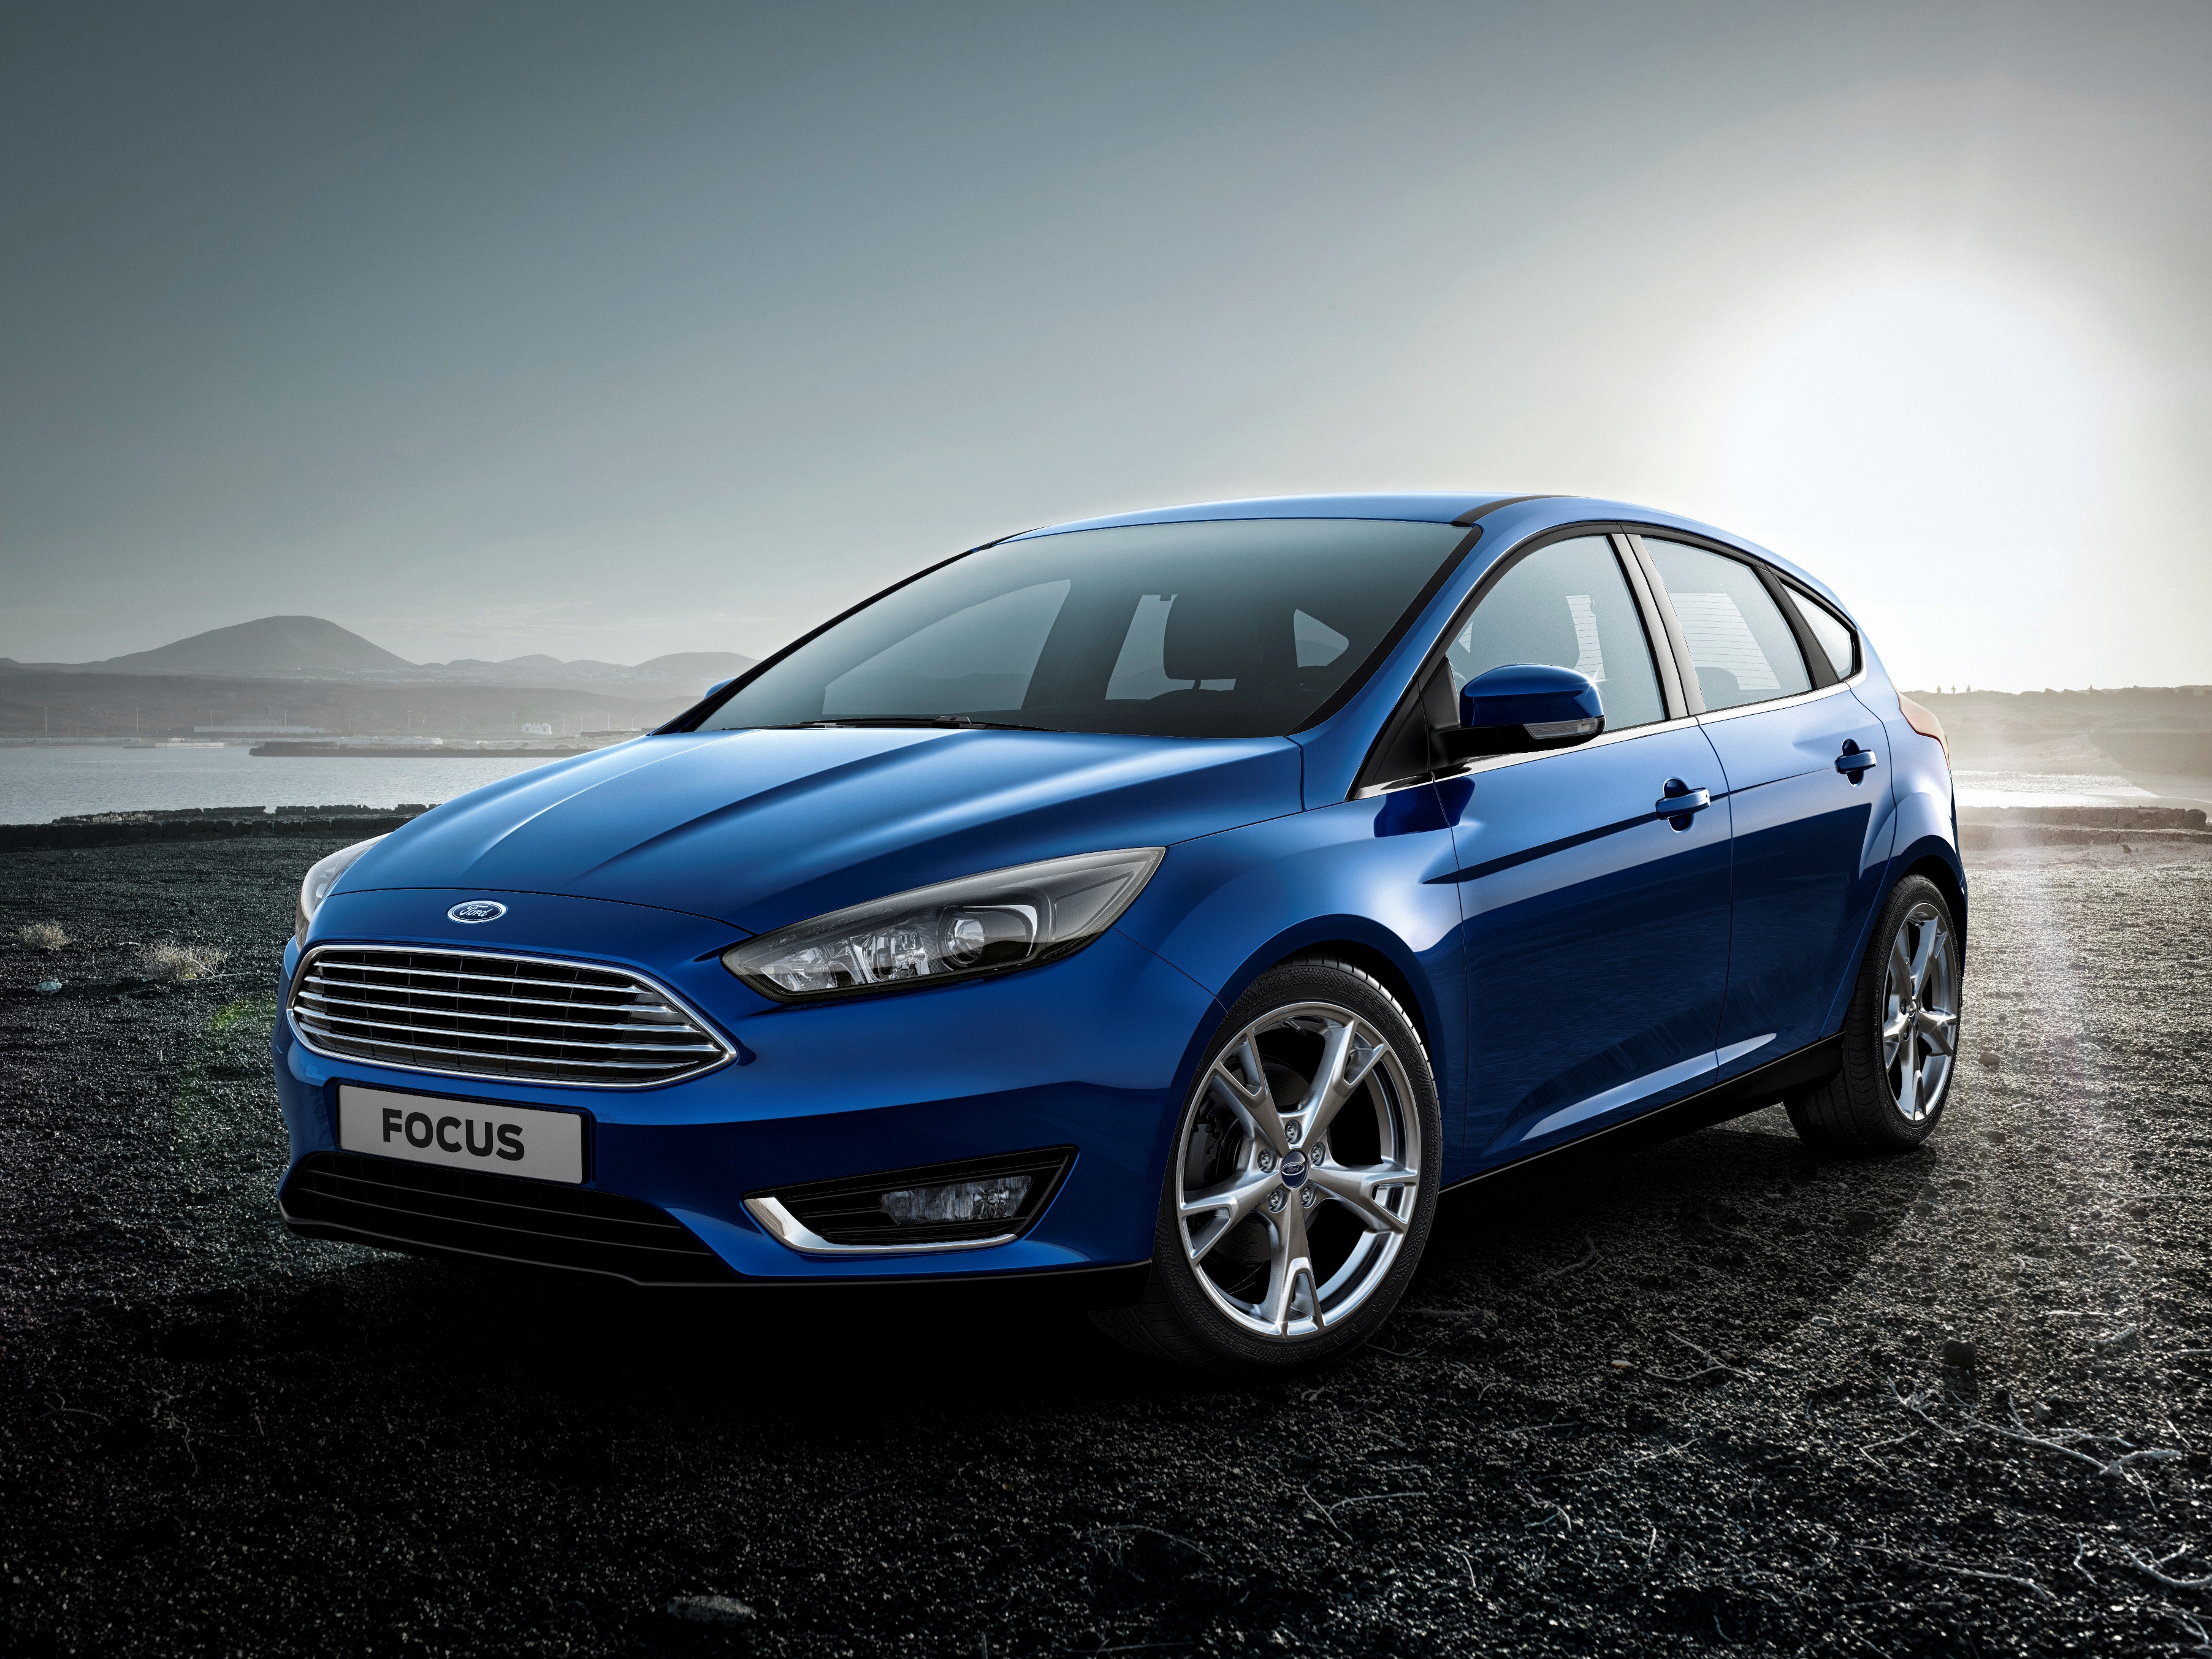 2014 2015 году. Ford Focus 2015. Ford Focus 2016. Форд фокус 4. Ford Focus III 2015.